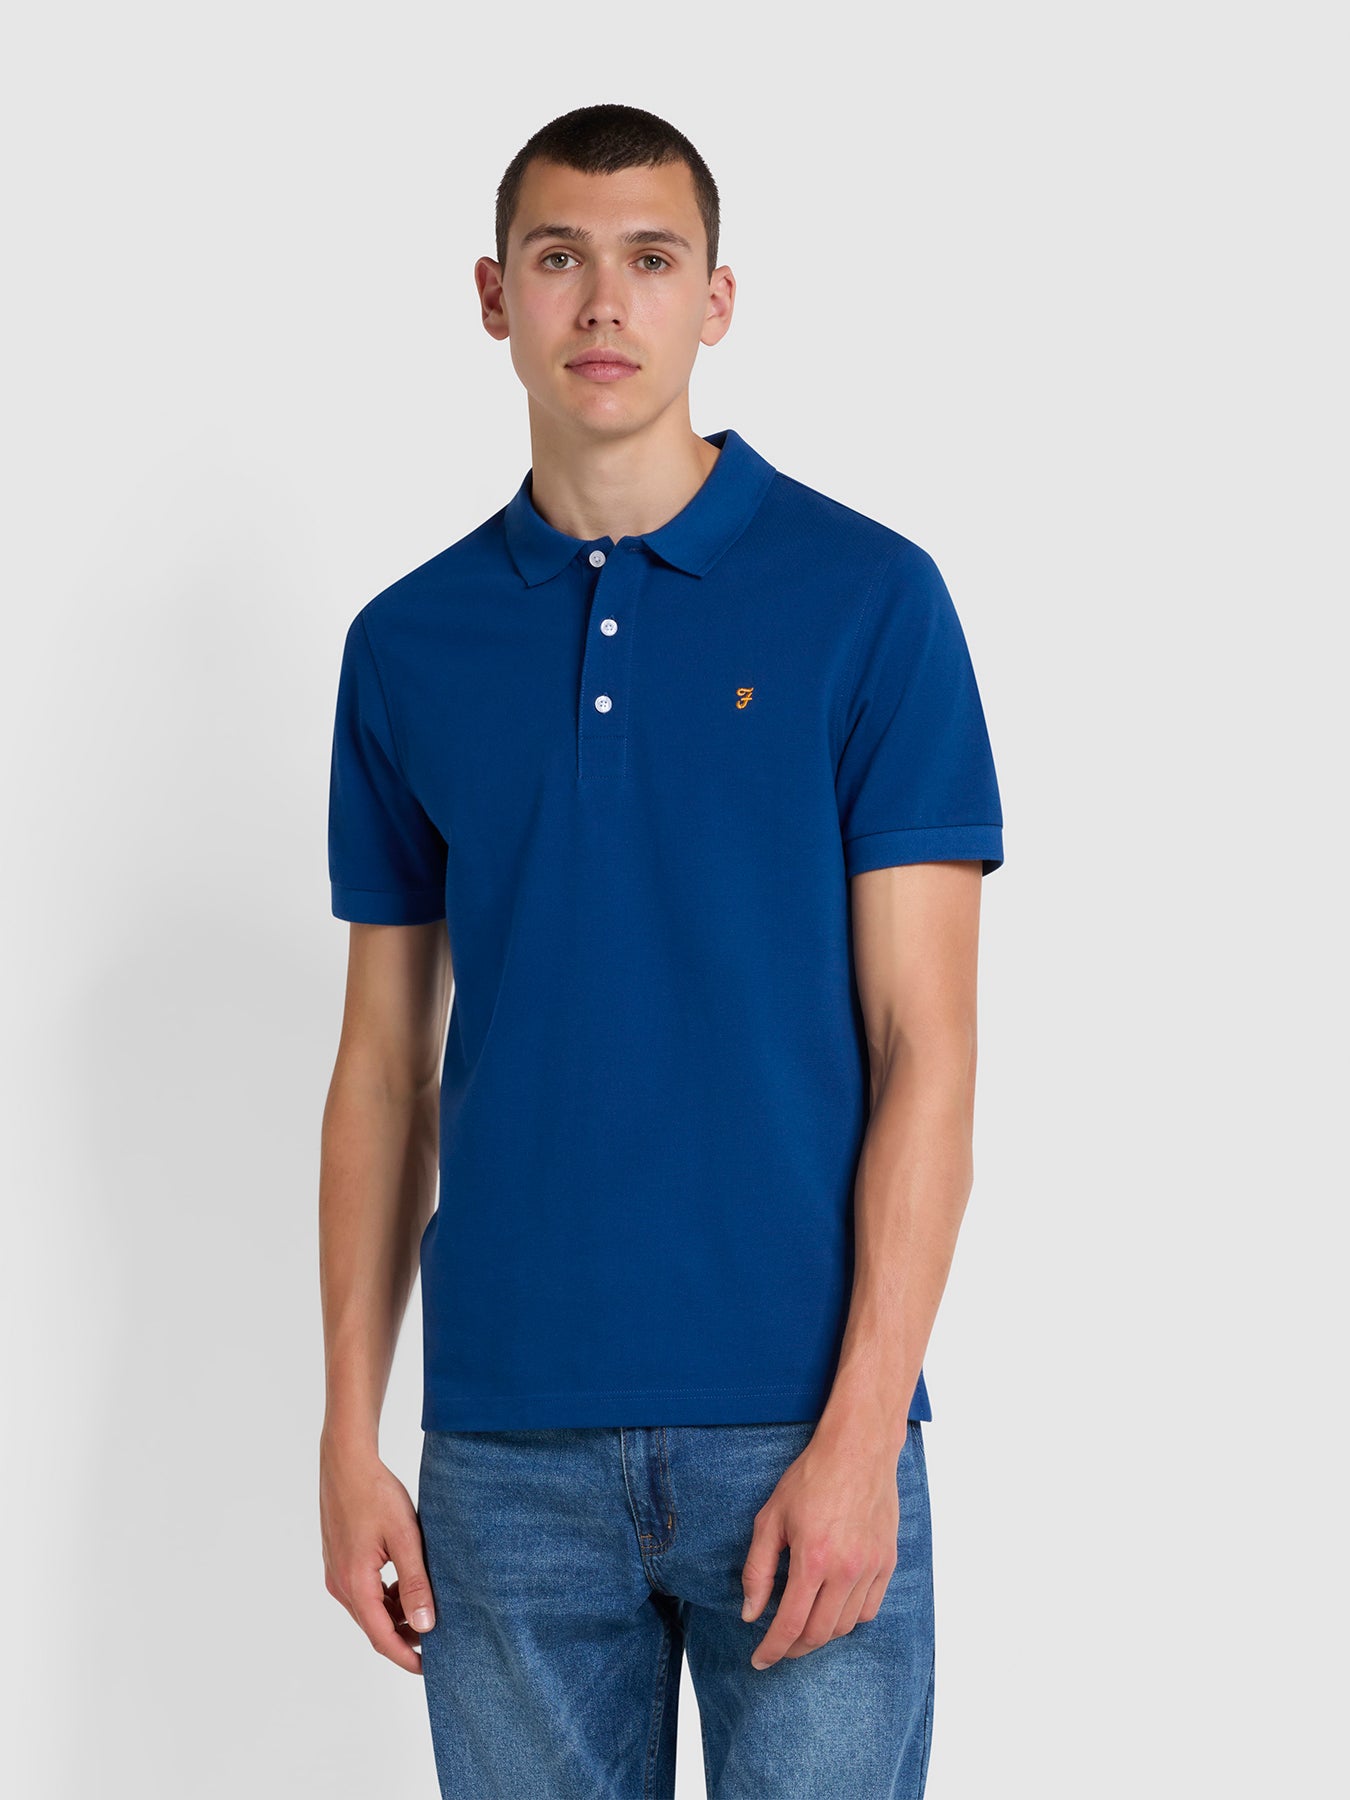 View Blanes Slim Fit Organic Cotton Polo Shirt In Blue Peony information